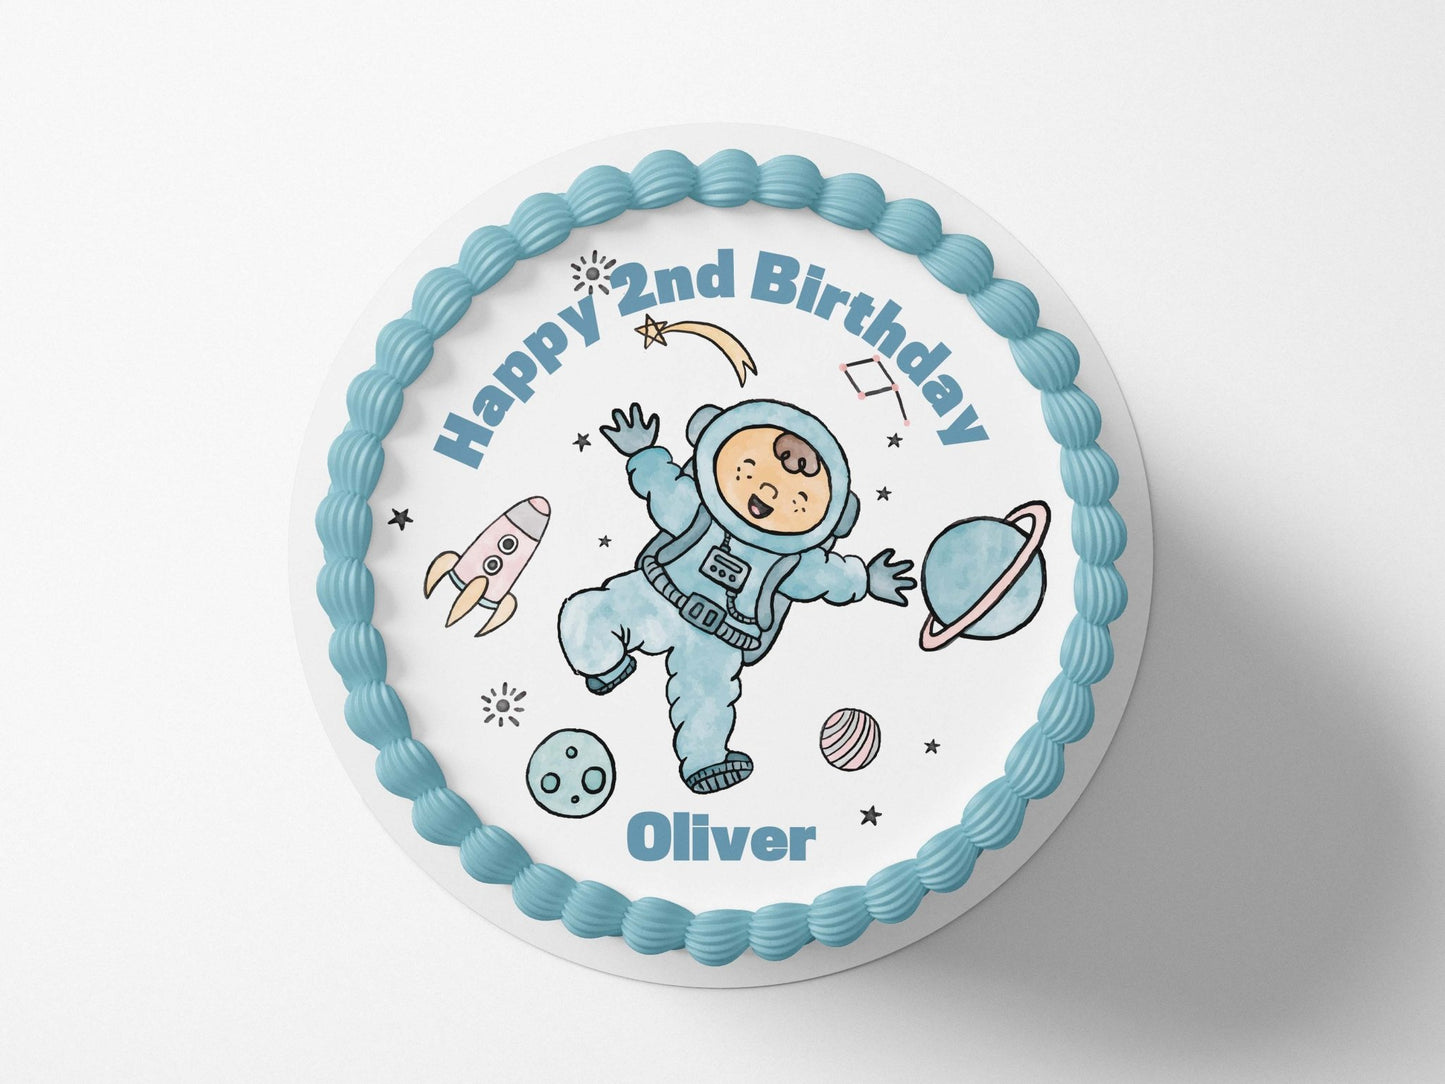 Outer Space - Edible Icing Toppers - printsoncakes - Edible Image service provider